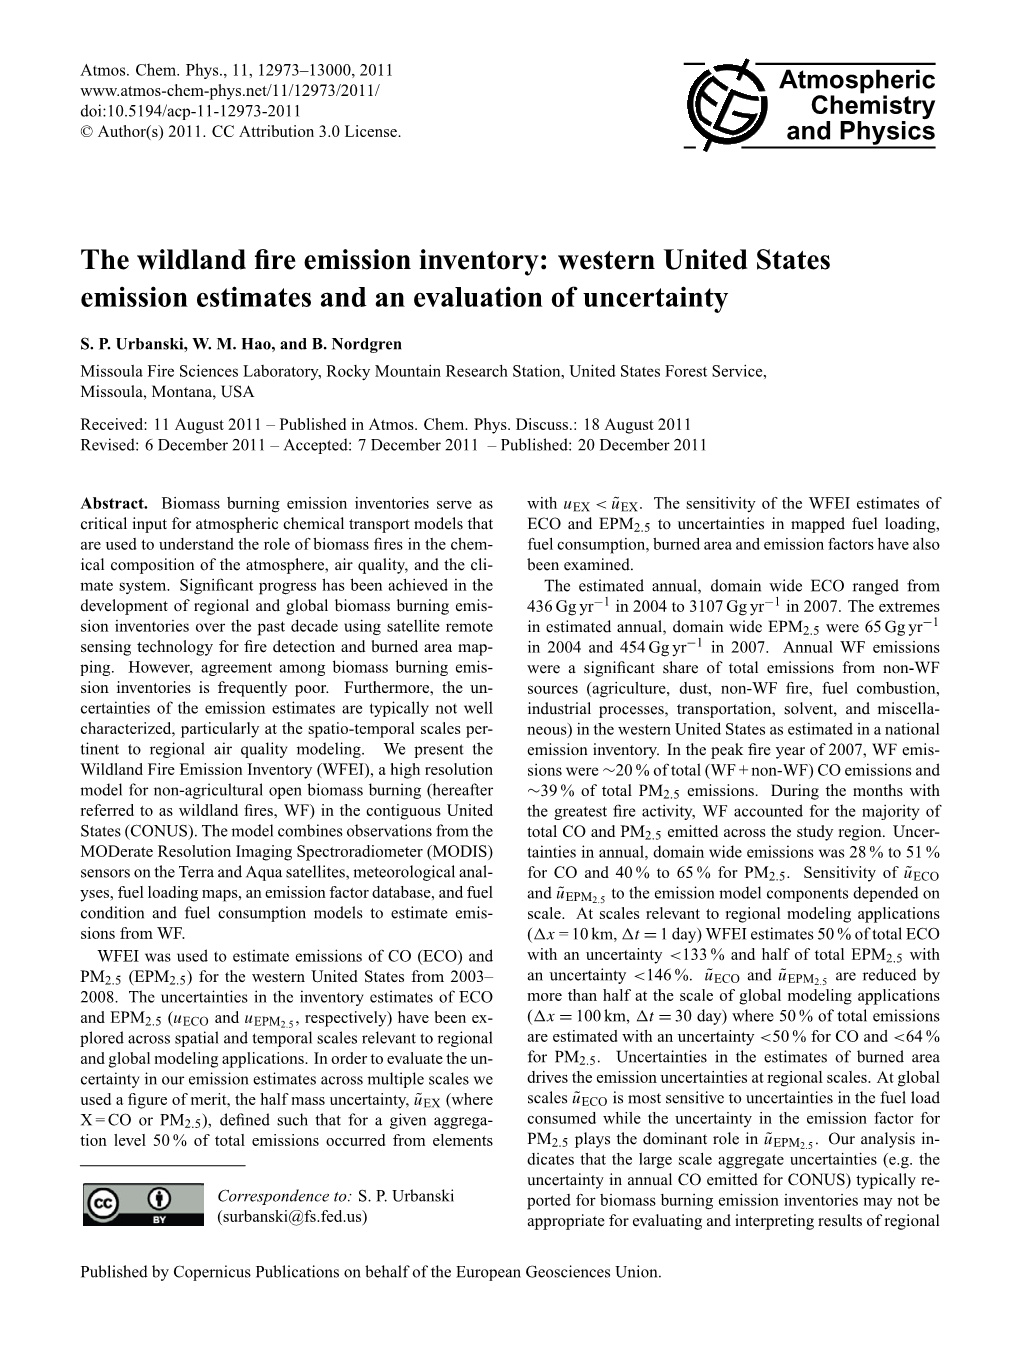 The Wildland Fire Emission Inventory: Western United States Emission Estimates and an Evaluation of Uncertainty